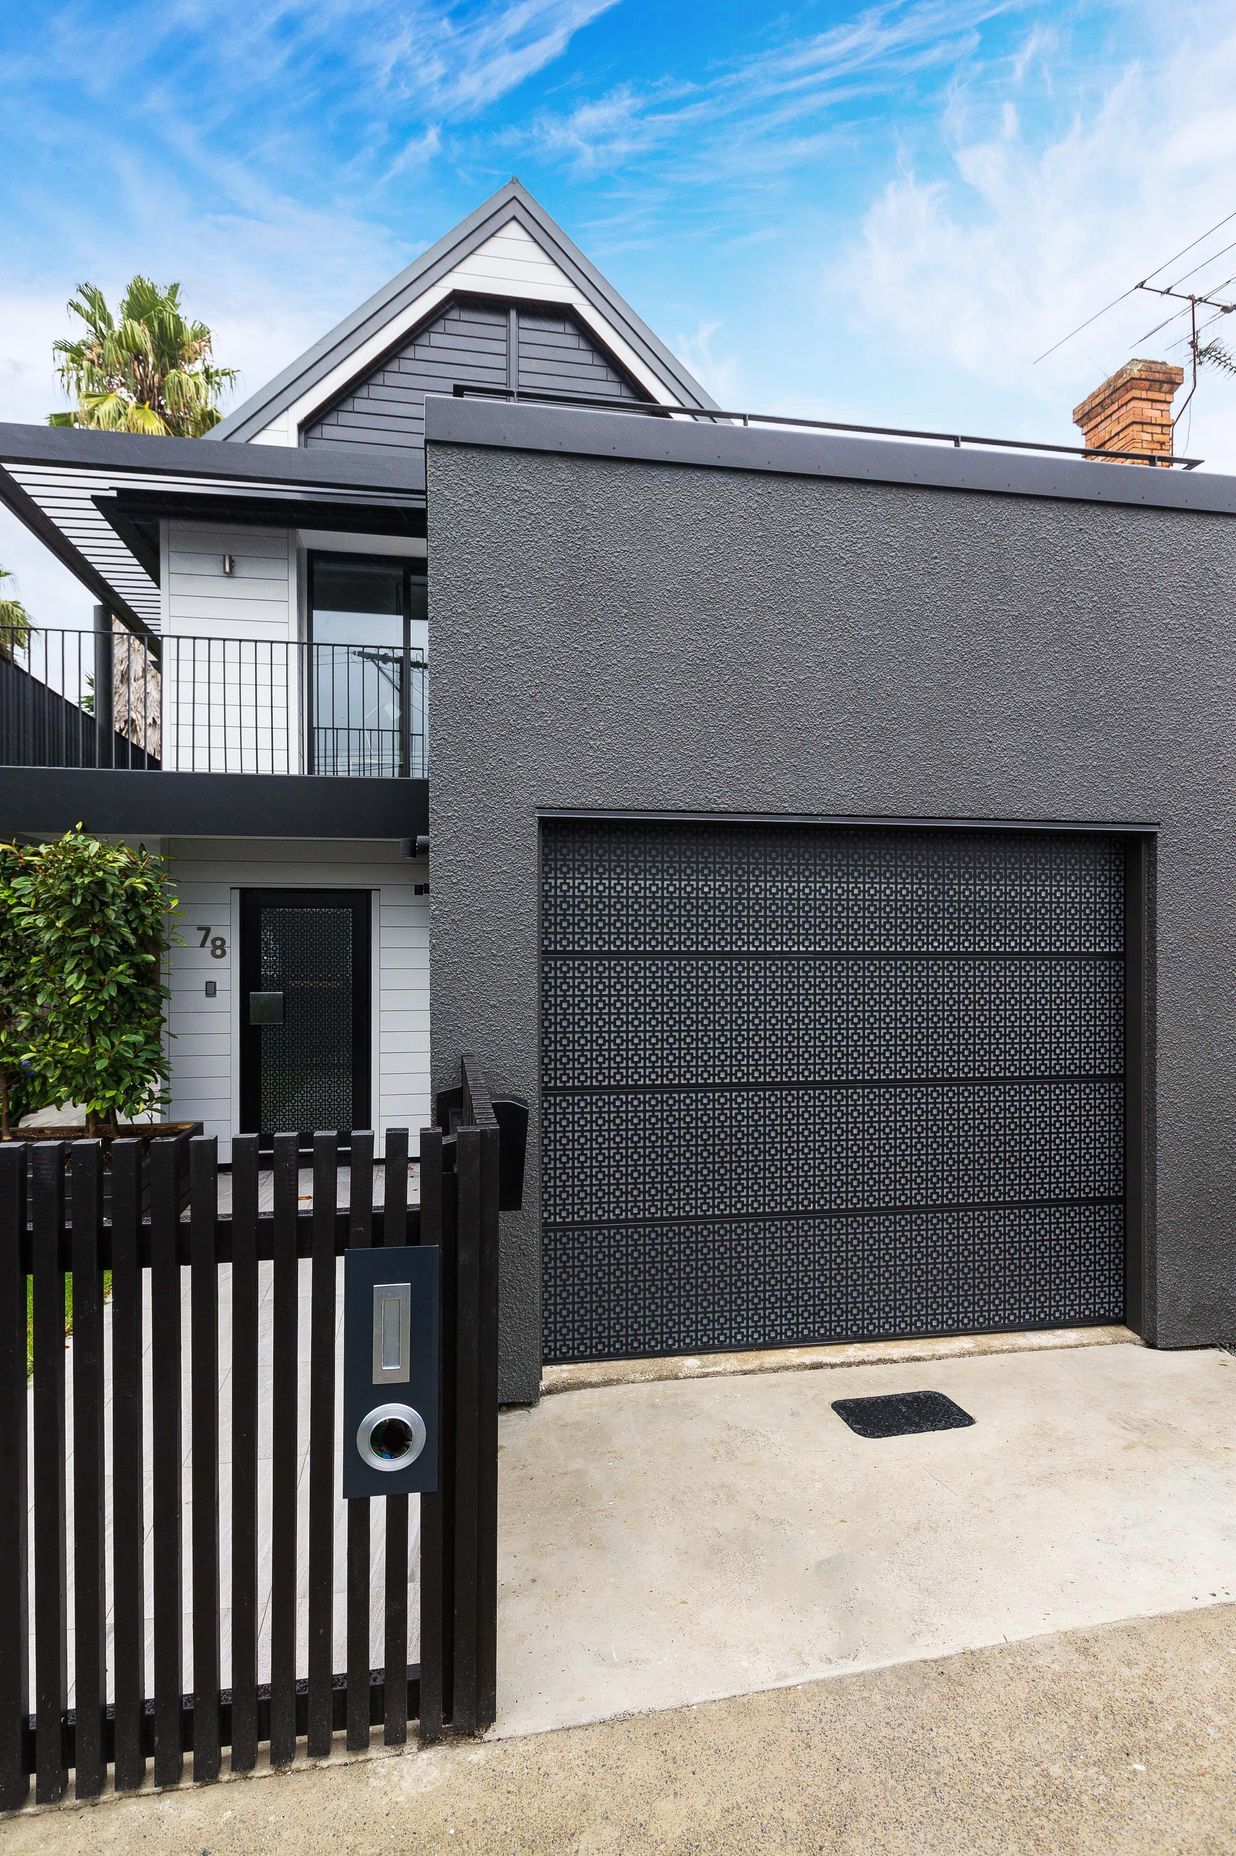 With plenty of designs available and the ability to be customised, this garage door option makes no compromises on aesthetic appeal.